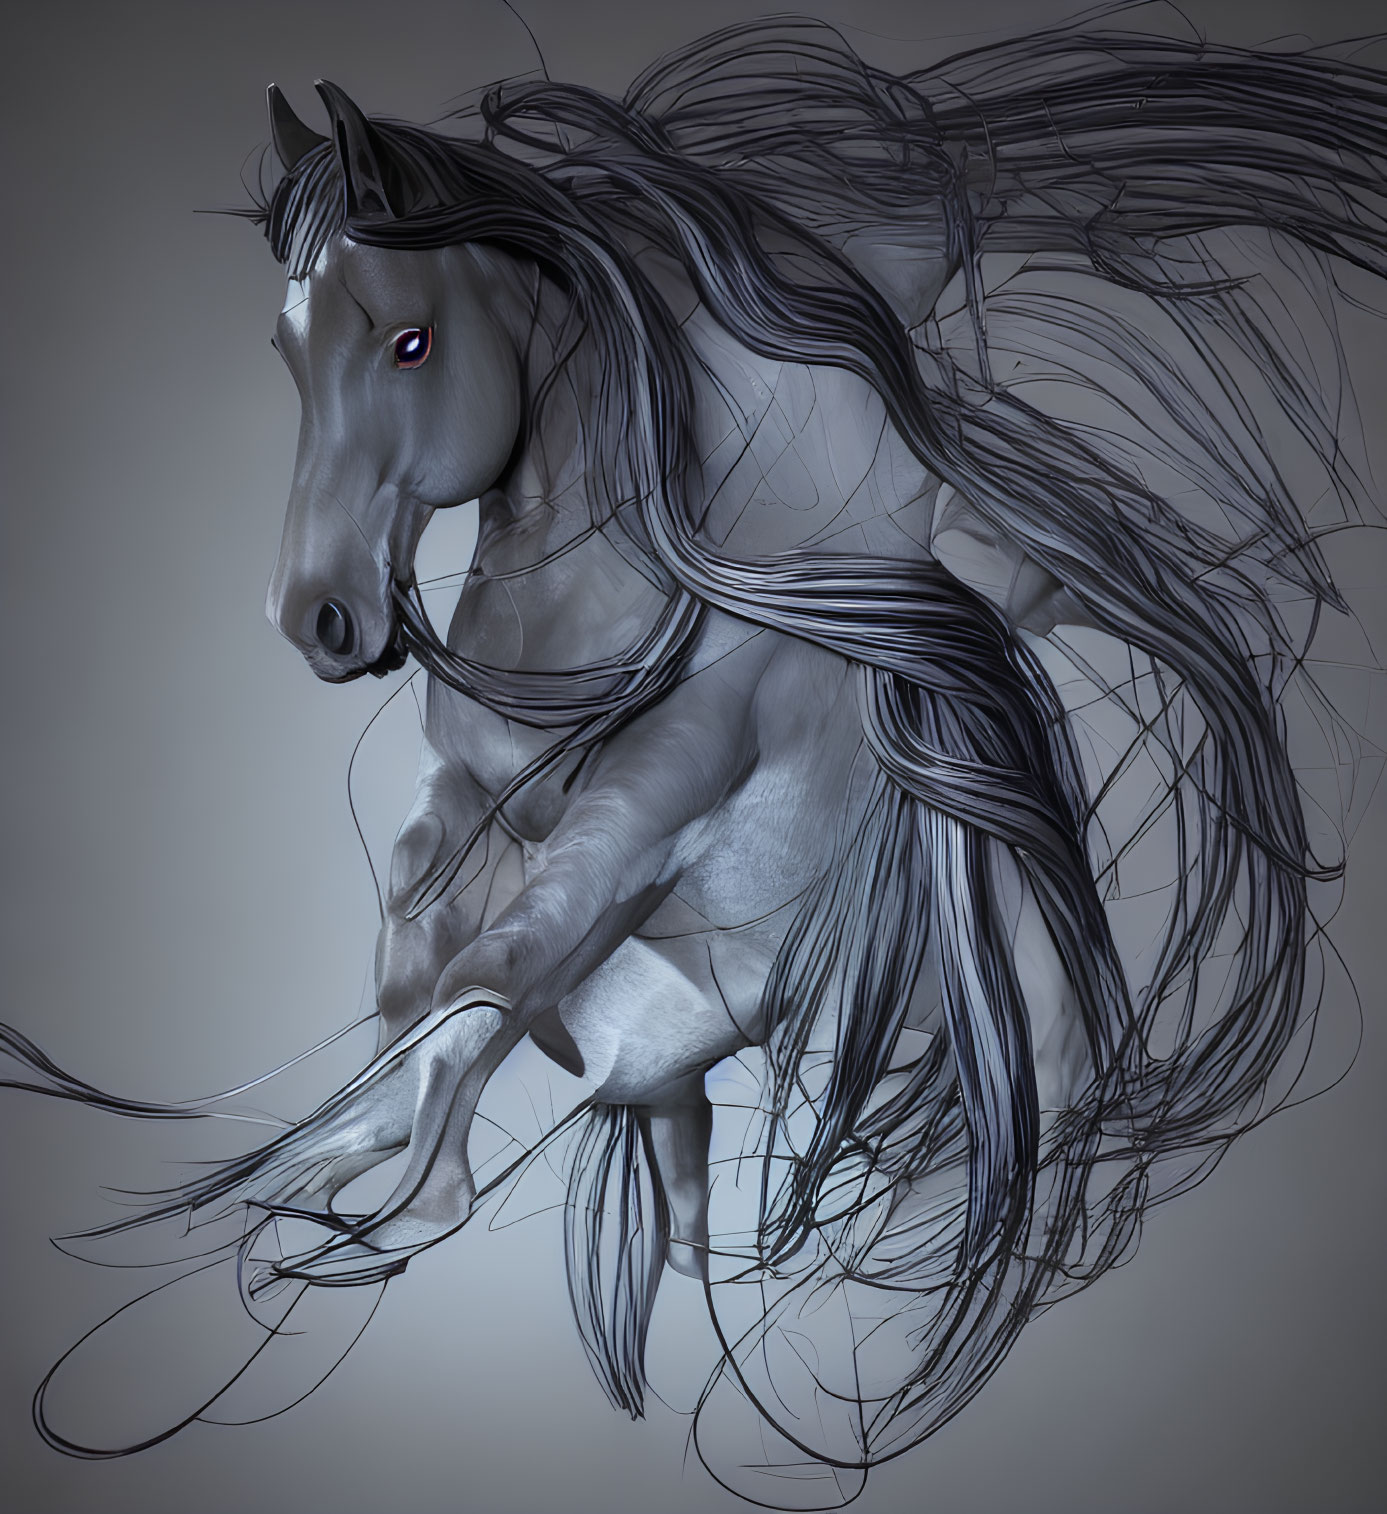 Monochromatic 3D horse illustration with flowing hair